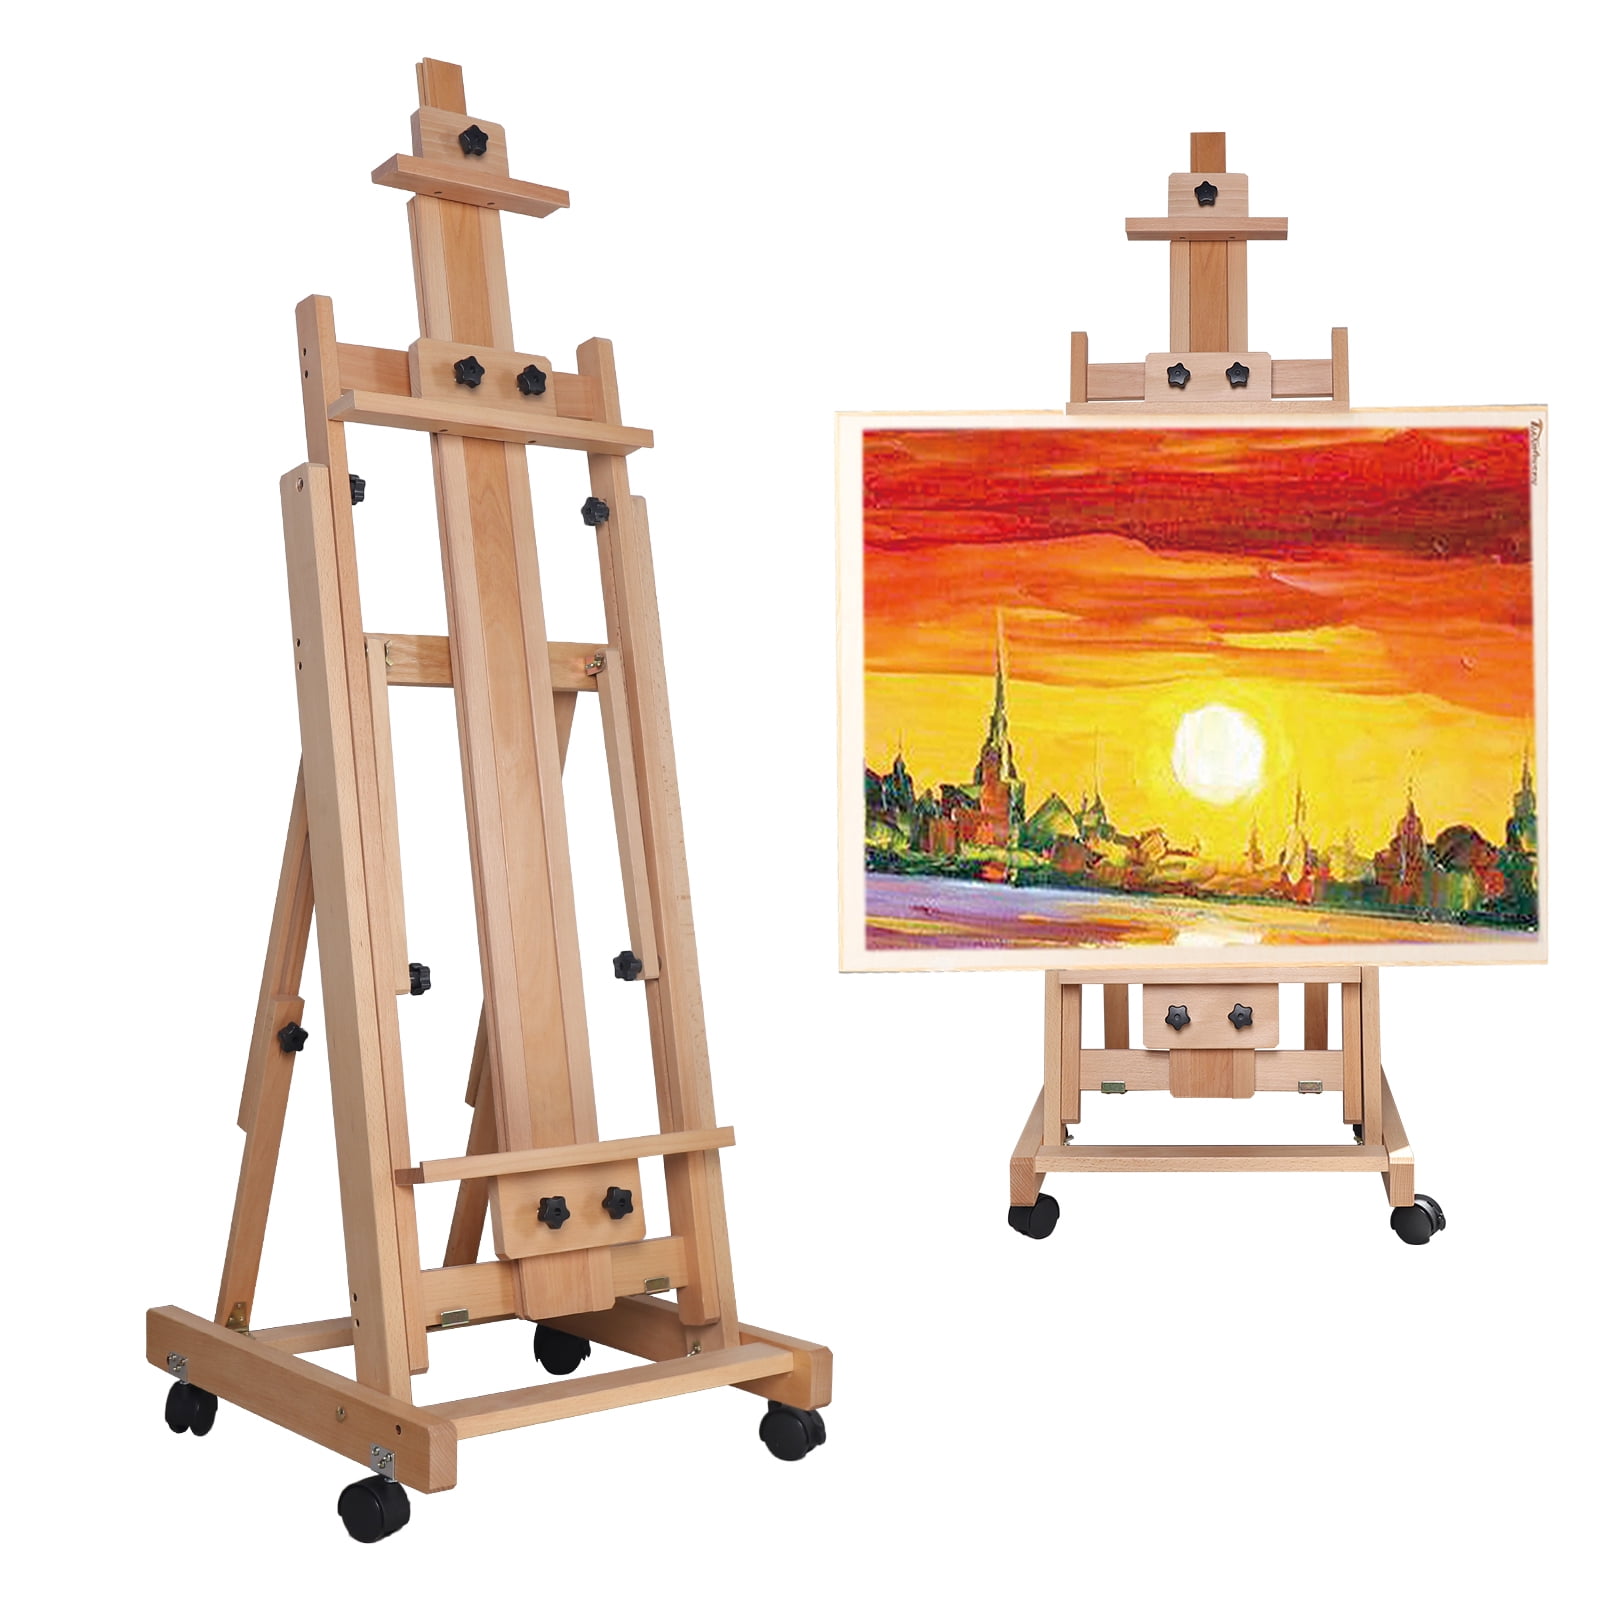 China Factory Olycraft Wooden Easels & Beech Wood Mobile Phone Holders, For  Arts and Crafts DIY Painting Projects, Triangle 125x73x17mm, 8pcs/set in  bulk online 